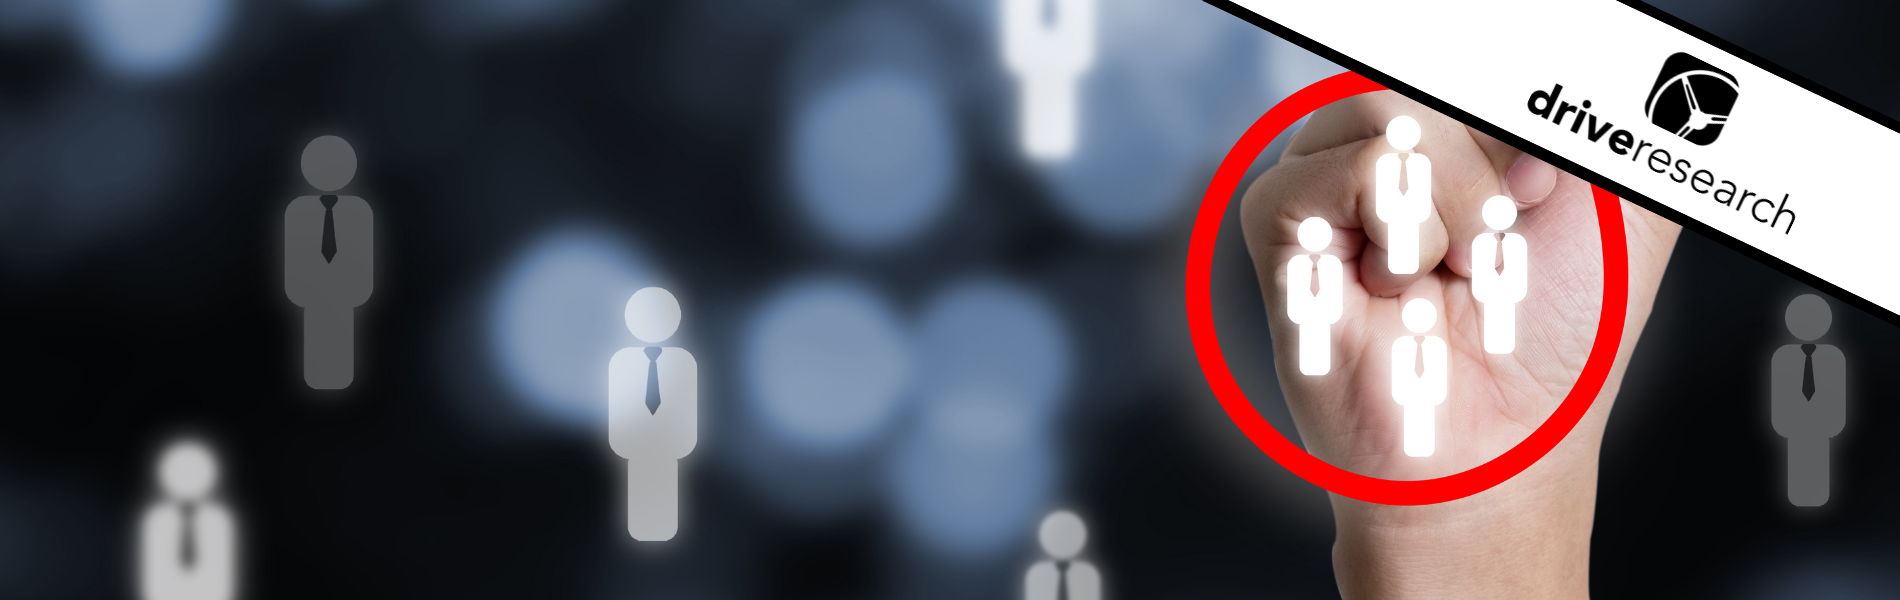 customer icons in a group circled in red